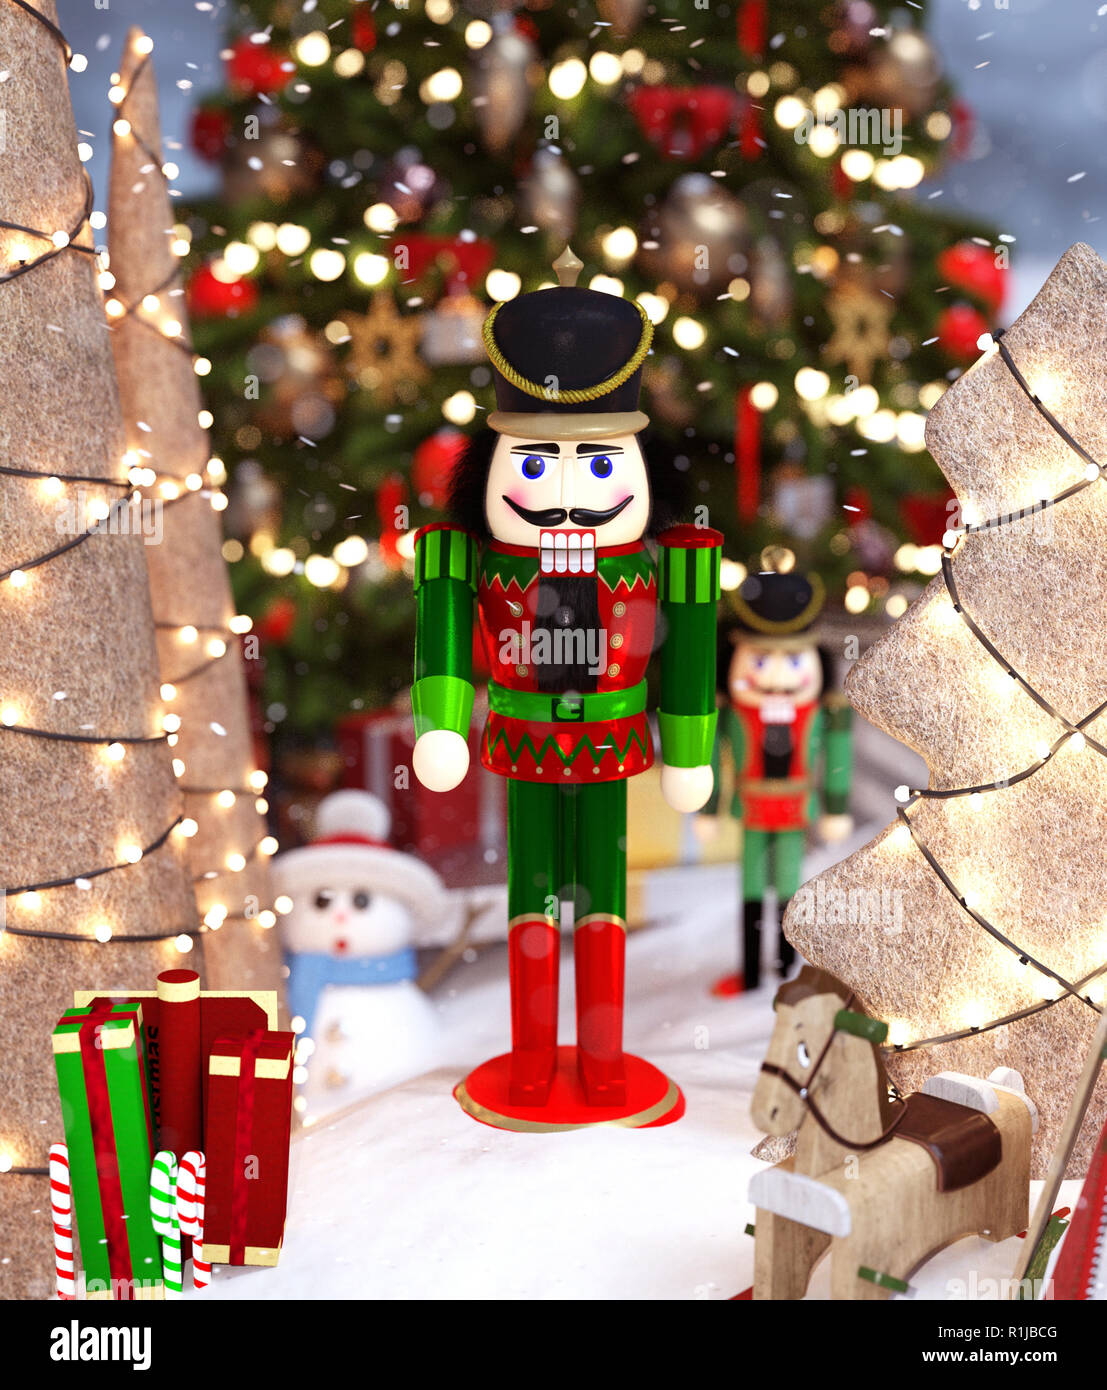 Nutcrackers toy decorated for christmas season,3d rendering Stock Photo